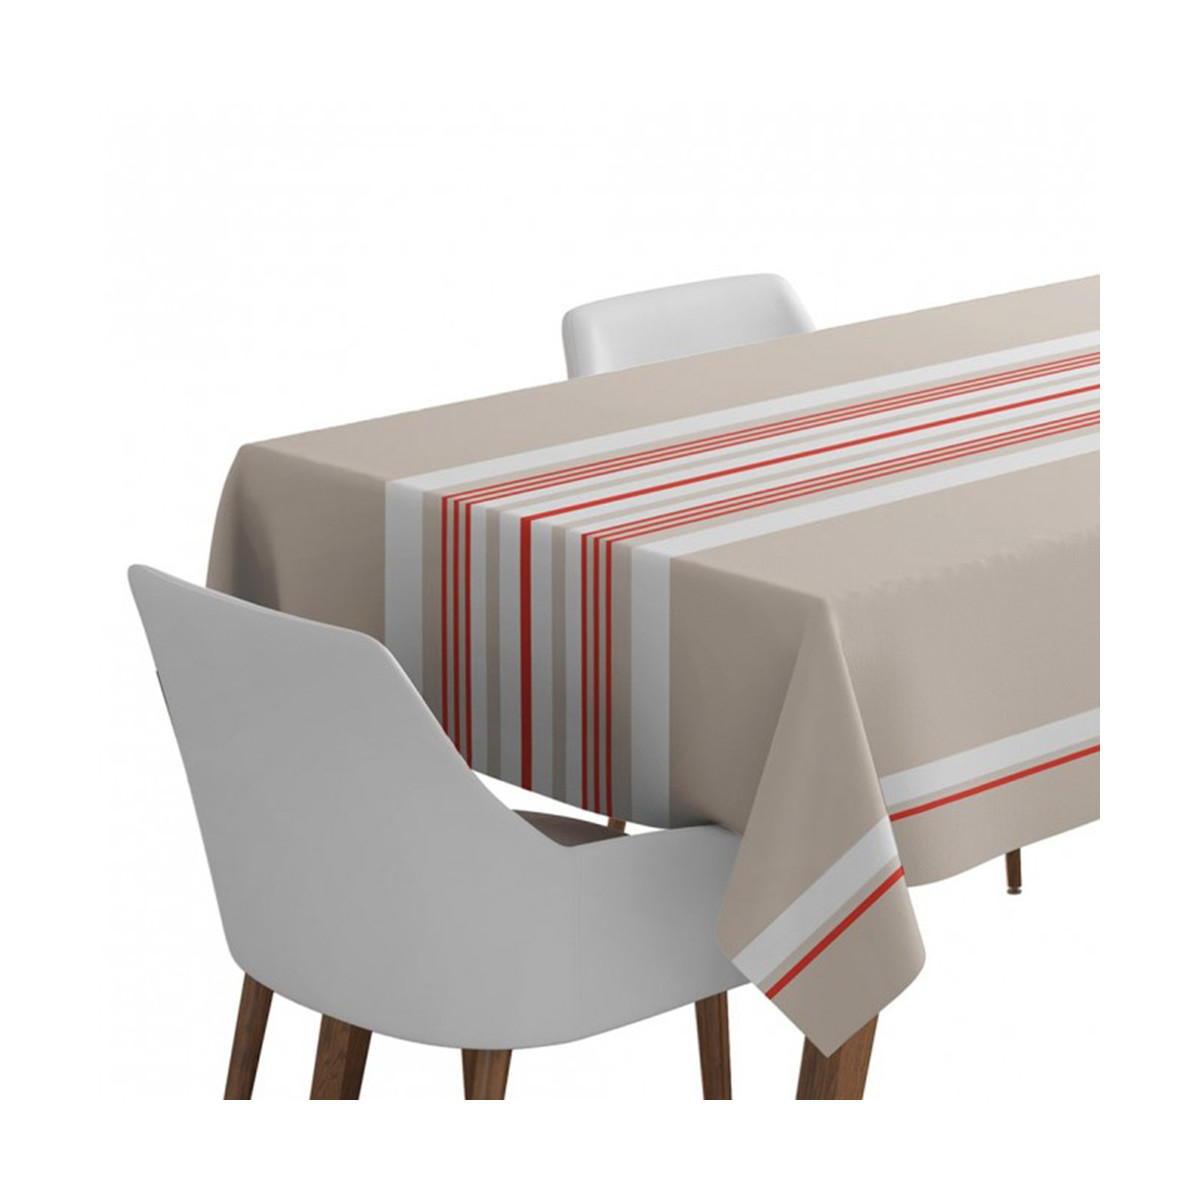 Home Tablecloth Maison Jean-Vier Donibane Beige